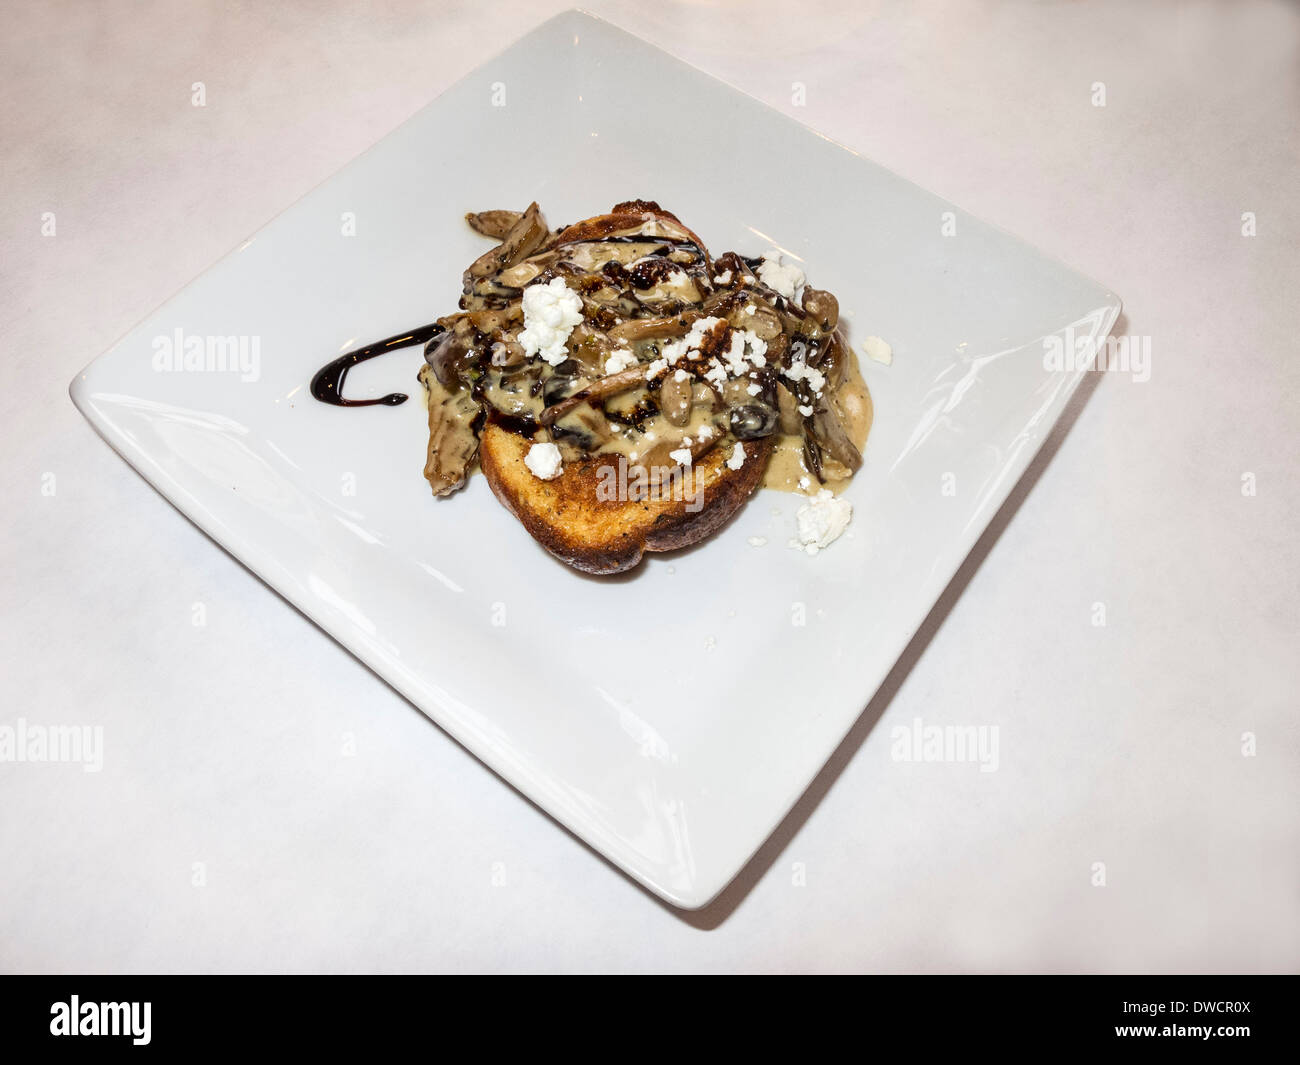 Mushroom taster featuring a wild mushroom saute over toast along with goat cheese, brandy cream and a balsamic reduction. Stock Photo